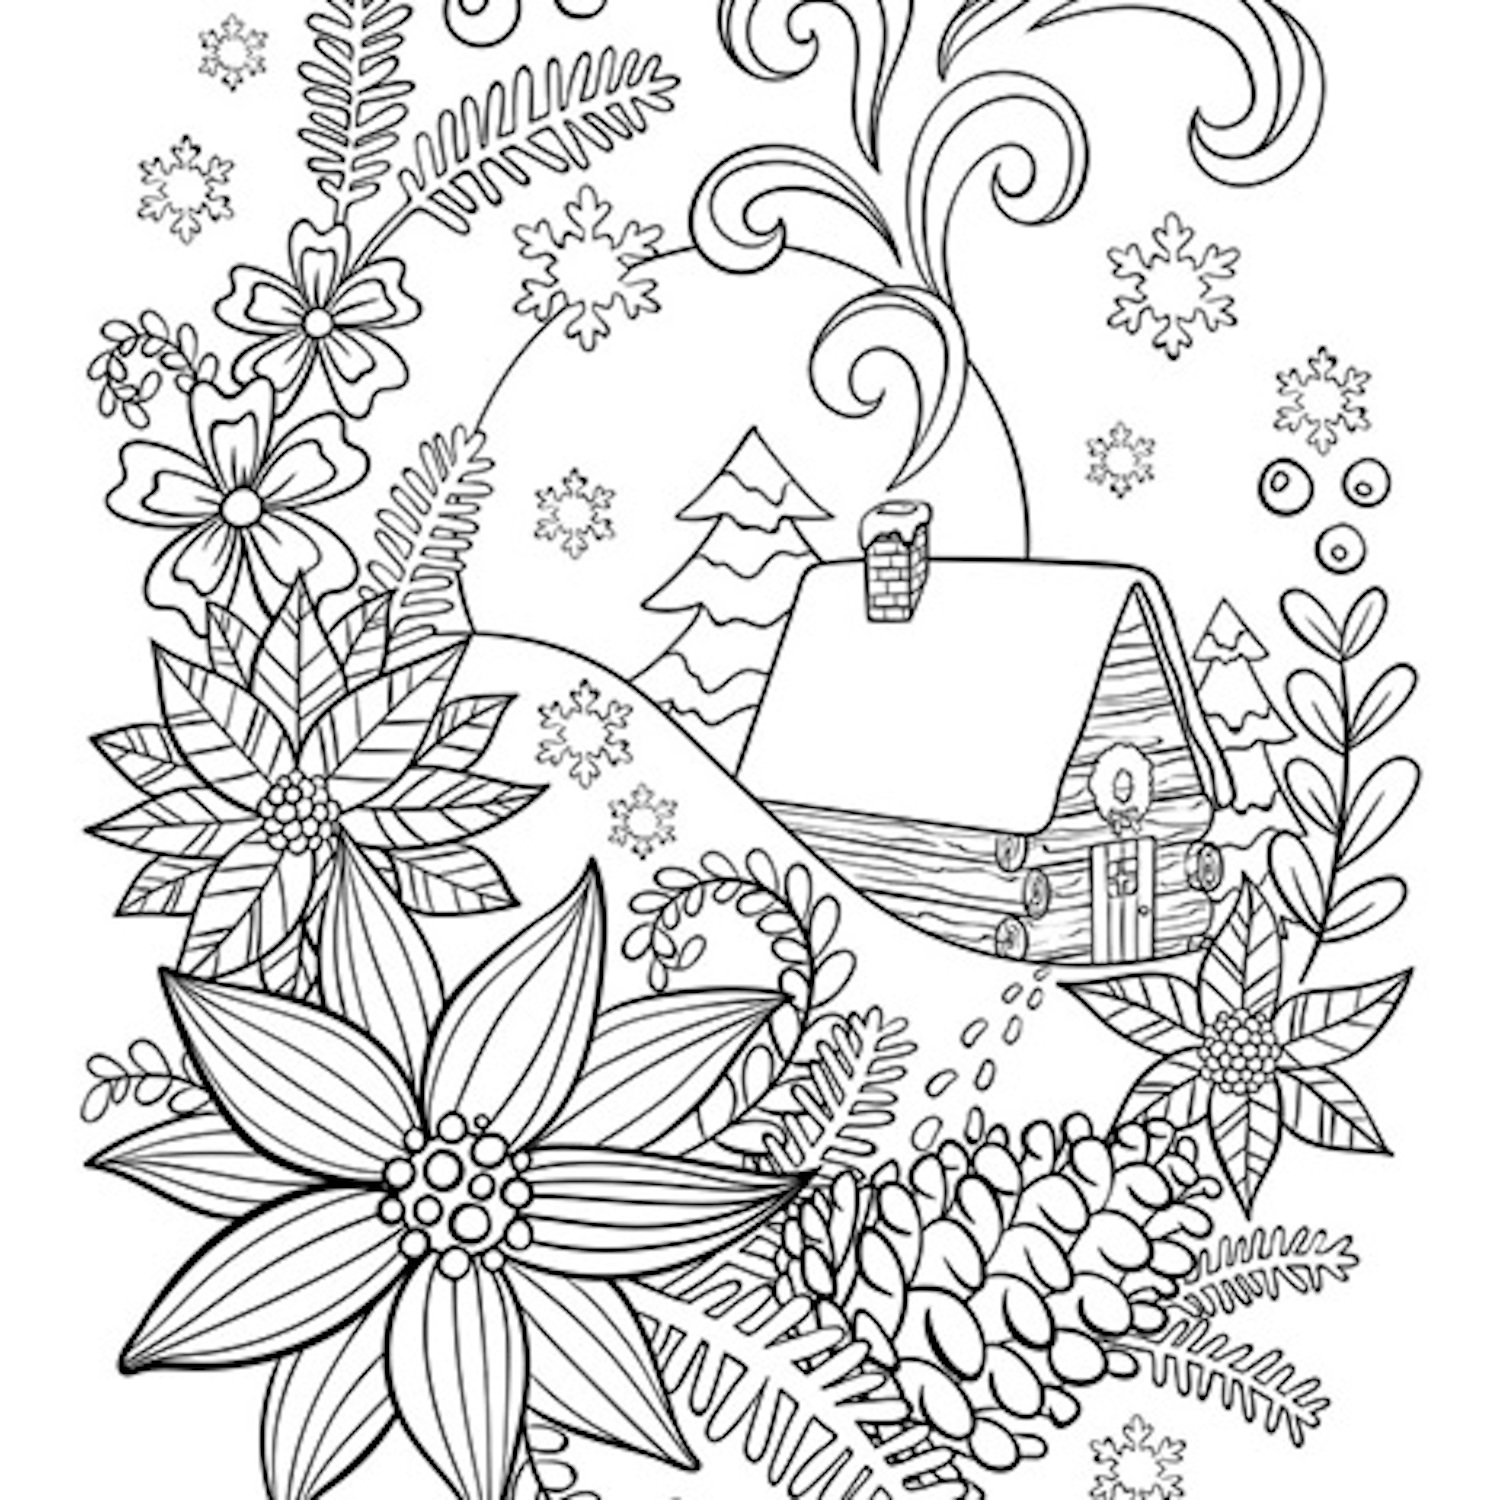 Free Christmas Coloring Page Cabin in the Snow cover image.